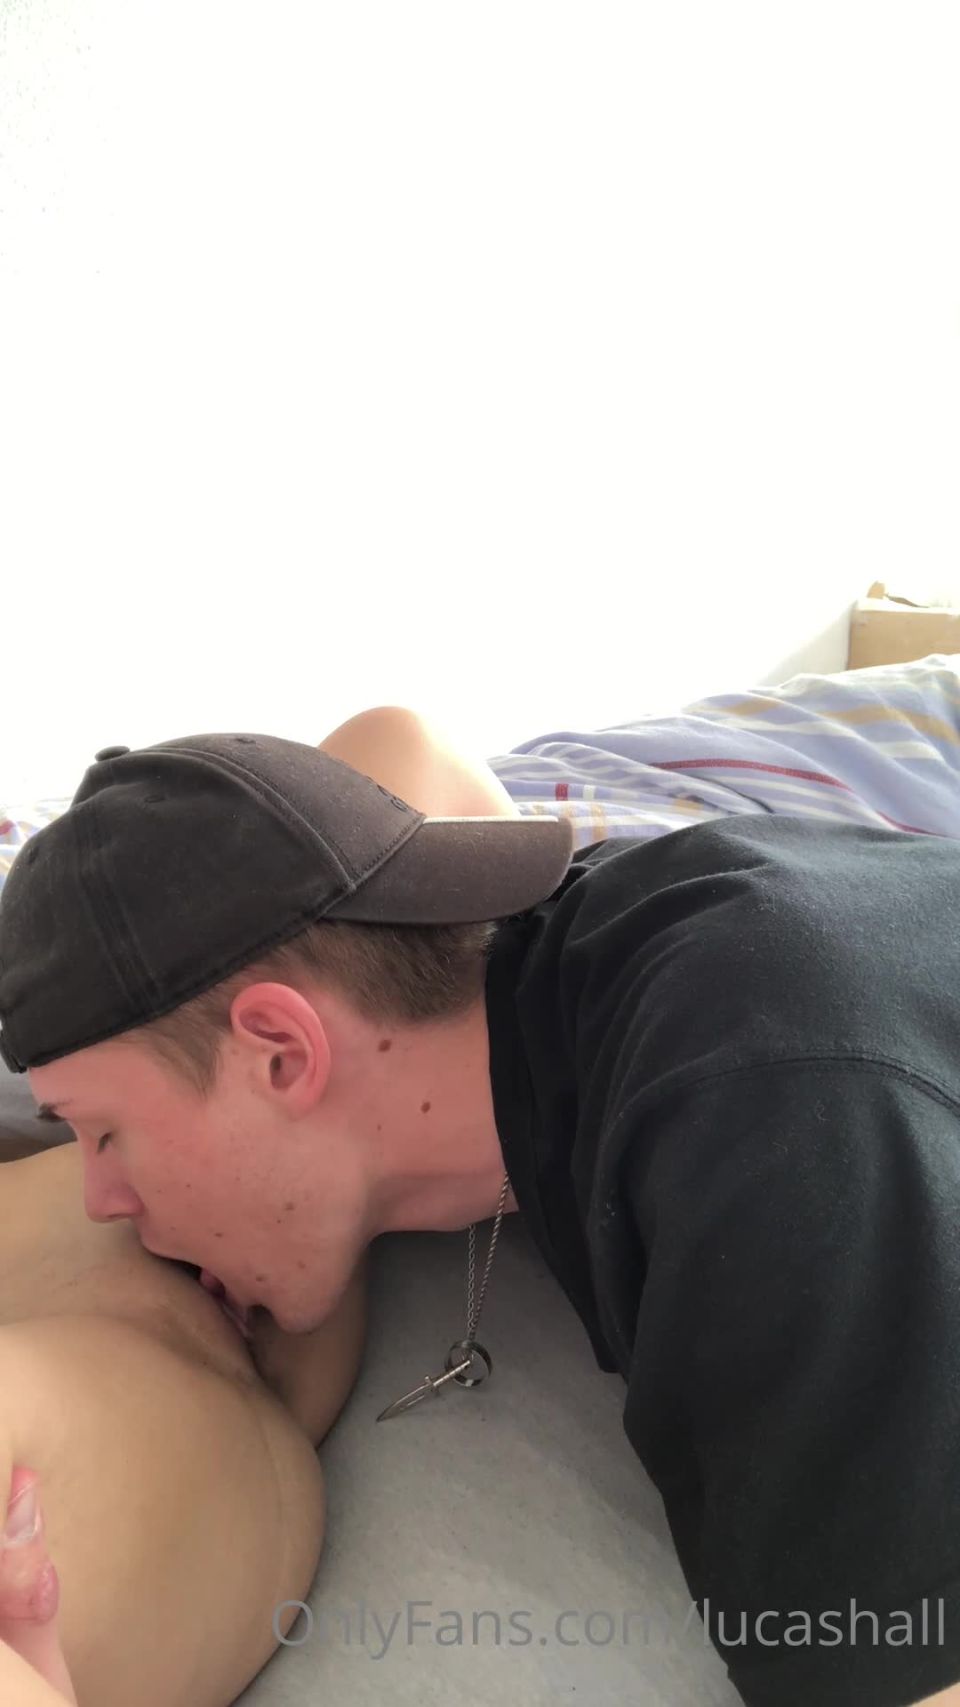 Lucas Hall () Lucashall - imagine me licking your ass like this 23-08-2020